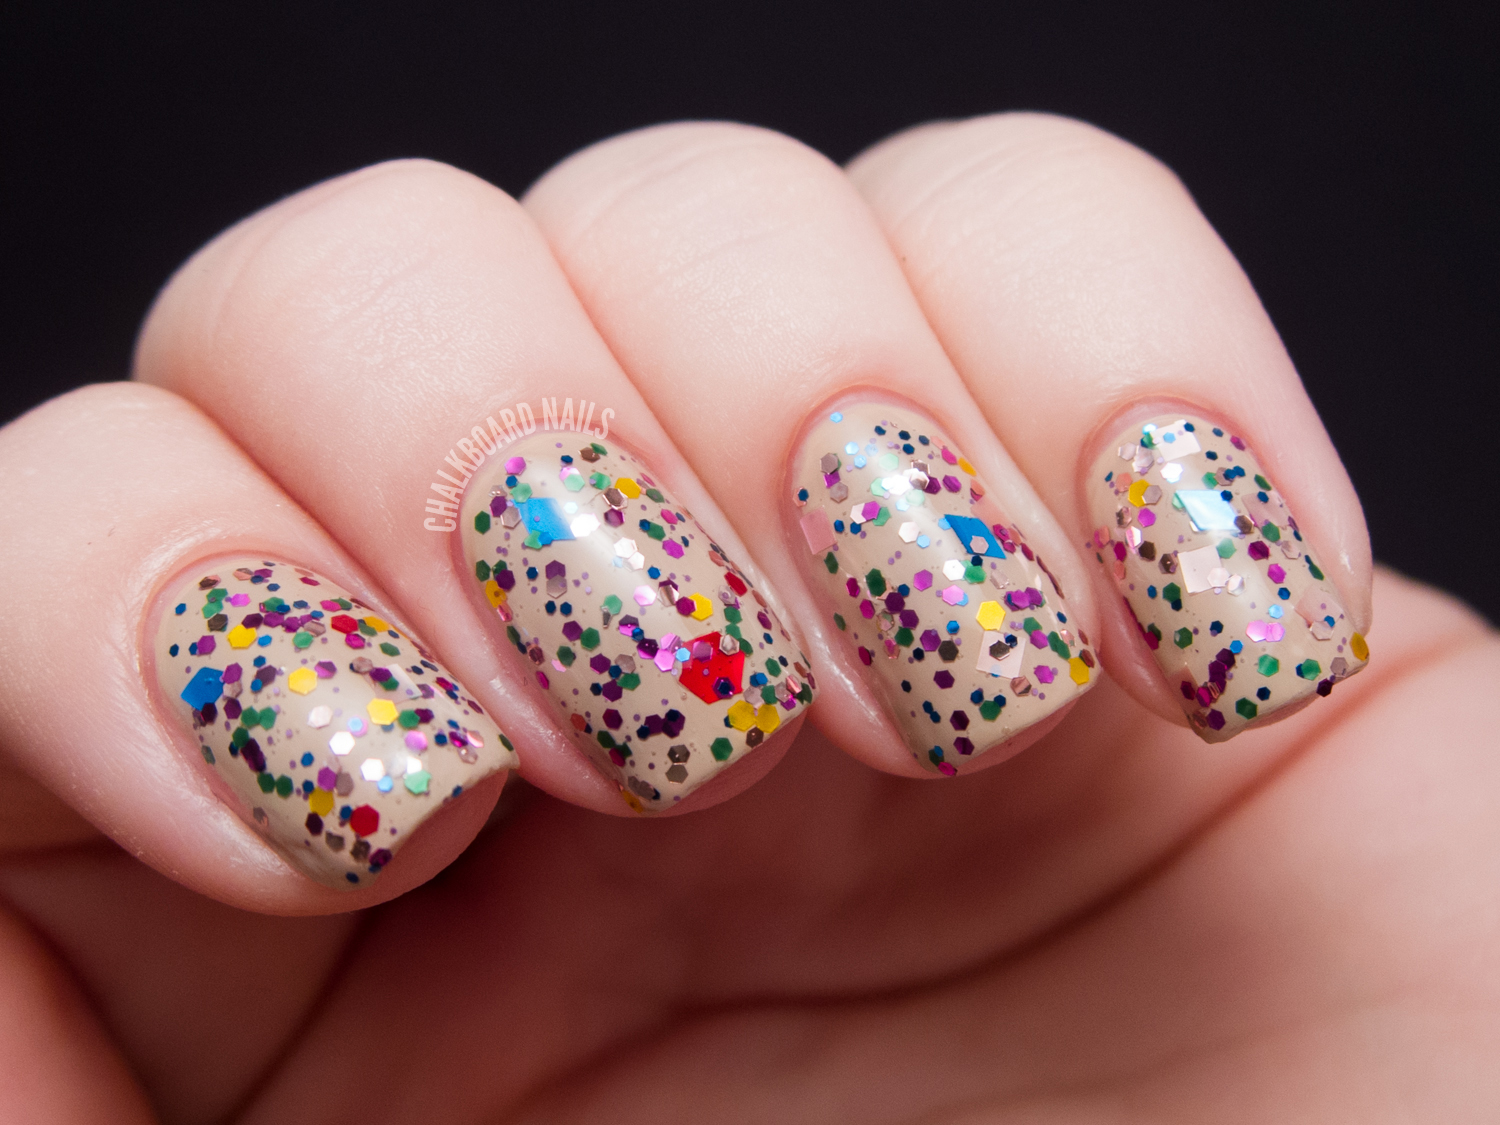 The Pretty and Polished Mathematical! Collection | Chalkboard Nails ...